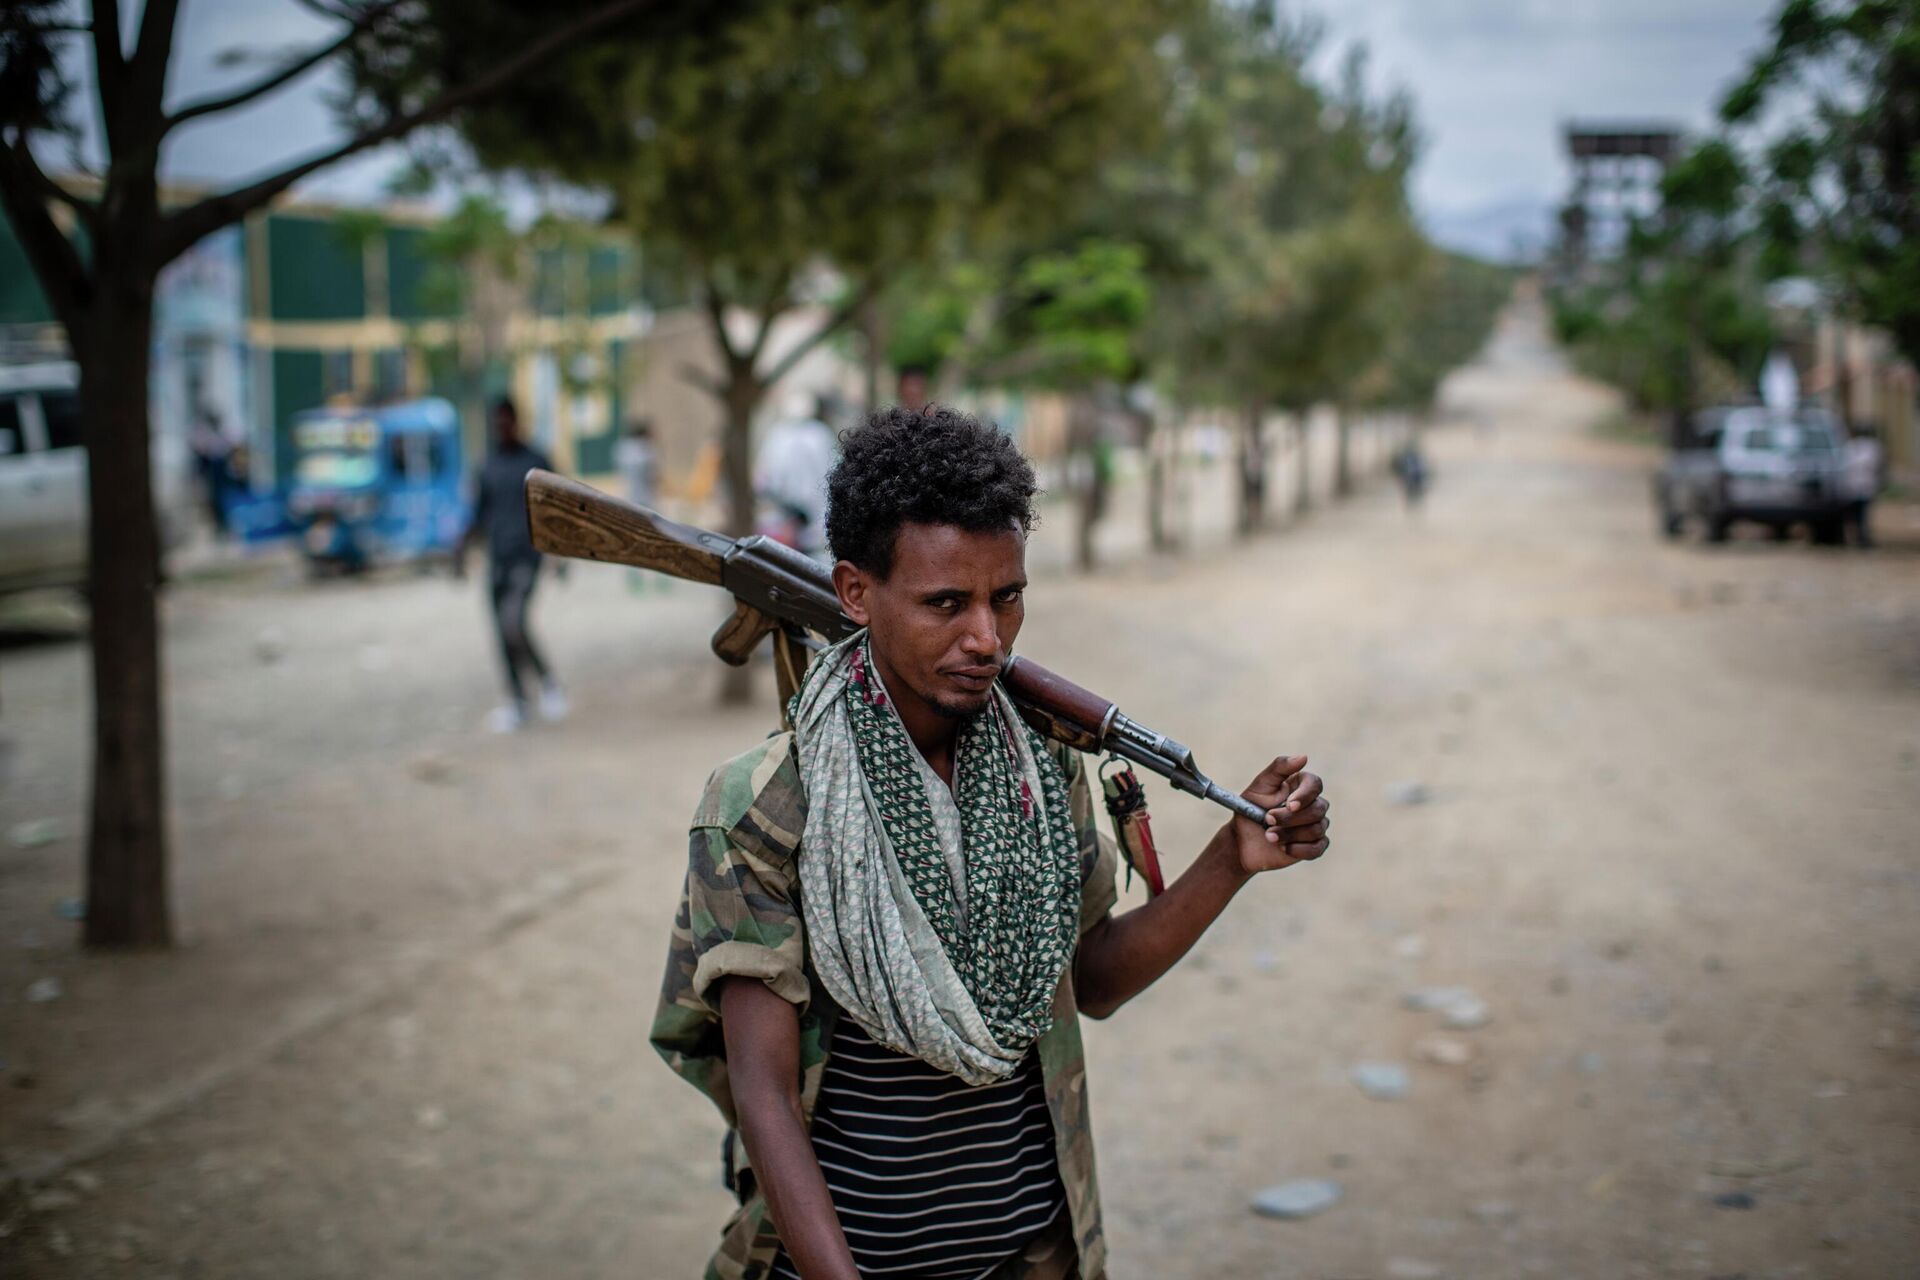 FILE - In this Friday, May 7, 2021 file photo, a fighter loyal to the Tigray People's Liberation Front (TPLF) walks along a street in the town of Hawzen, then-controlled by the group but later re-taken by government forces, in the Tigray region of northern Ethiopia. Tigray forces say Ethiopia’s government has launched its threatened major military offensive against them in an attempt to end a nearly year-old war. A statement from the Tigray external affairs office on Monday, Oct. 11 alleged that hundreds of thousands of Ethiopian “regular and irregular fighters” launched a coordinated assault on several fronts. (AP Photo/Ben Curtis, File) - Sputnik International, 1920, 10.09.2022